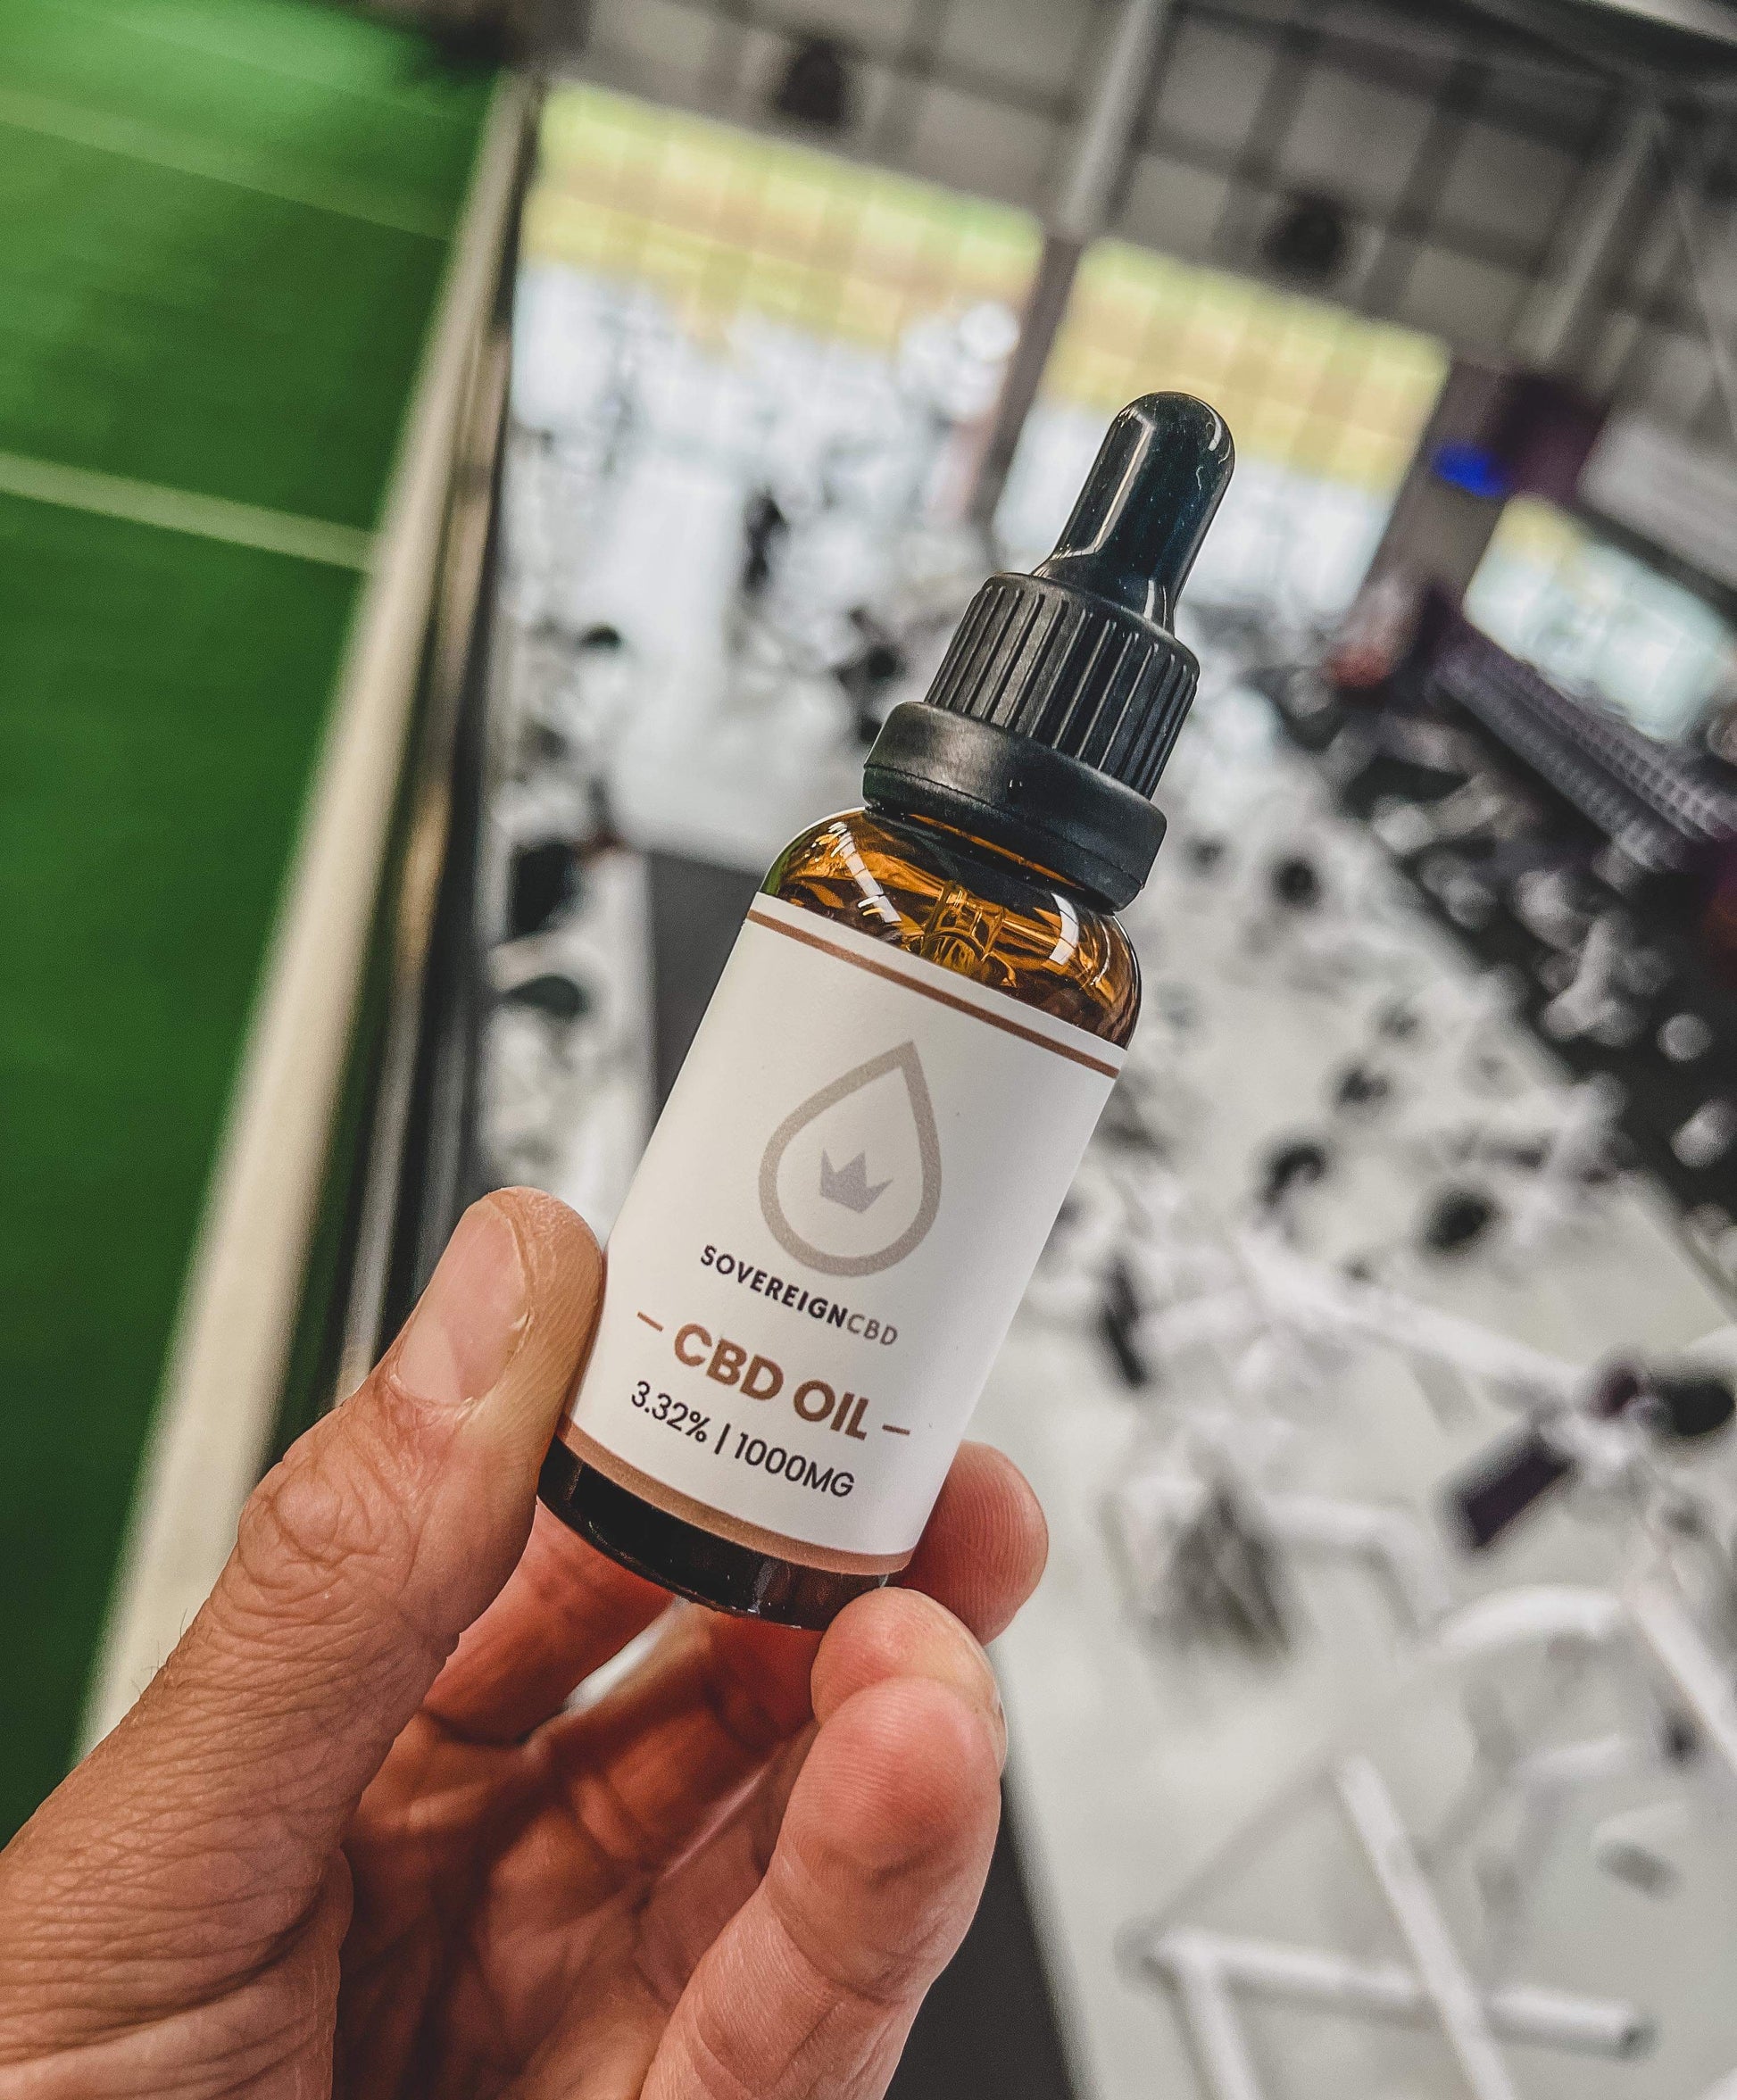 Explore the purity and potency of Sovereign Wellness 1000mg Isolate CBD Oil Tincture. THC Free. Immerse yourself in a premium organic cbd blend designed for optimal wellness. Our lab-tested cbd tincture features a calibrated dropper for precise dosing, ensuring a seamless and effective CBD experience. Elevate your well-being with each carefully measured drop.